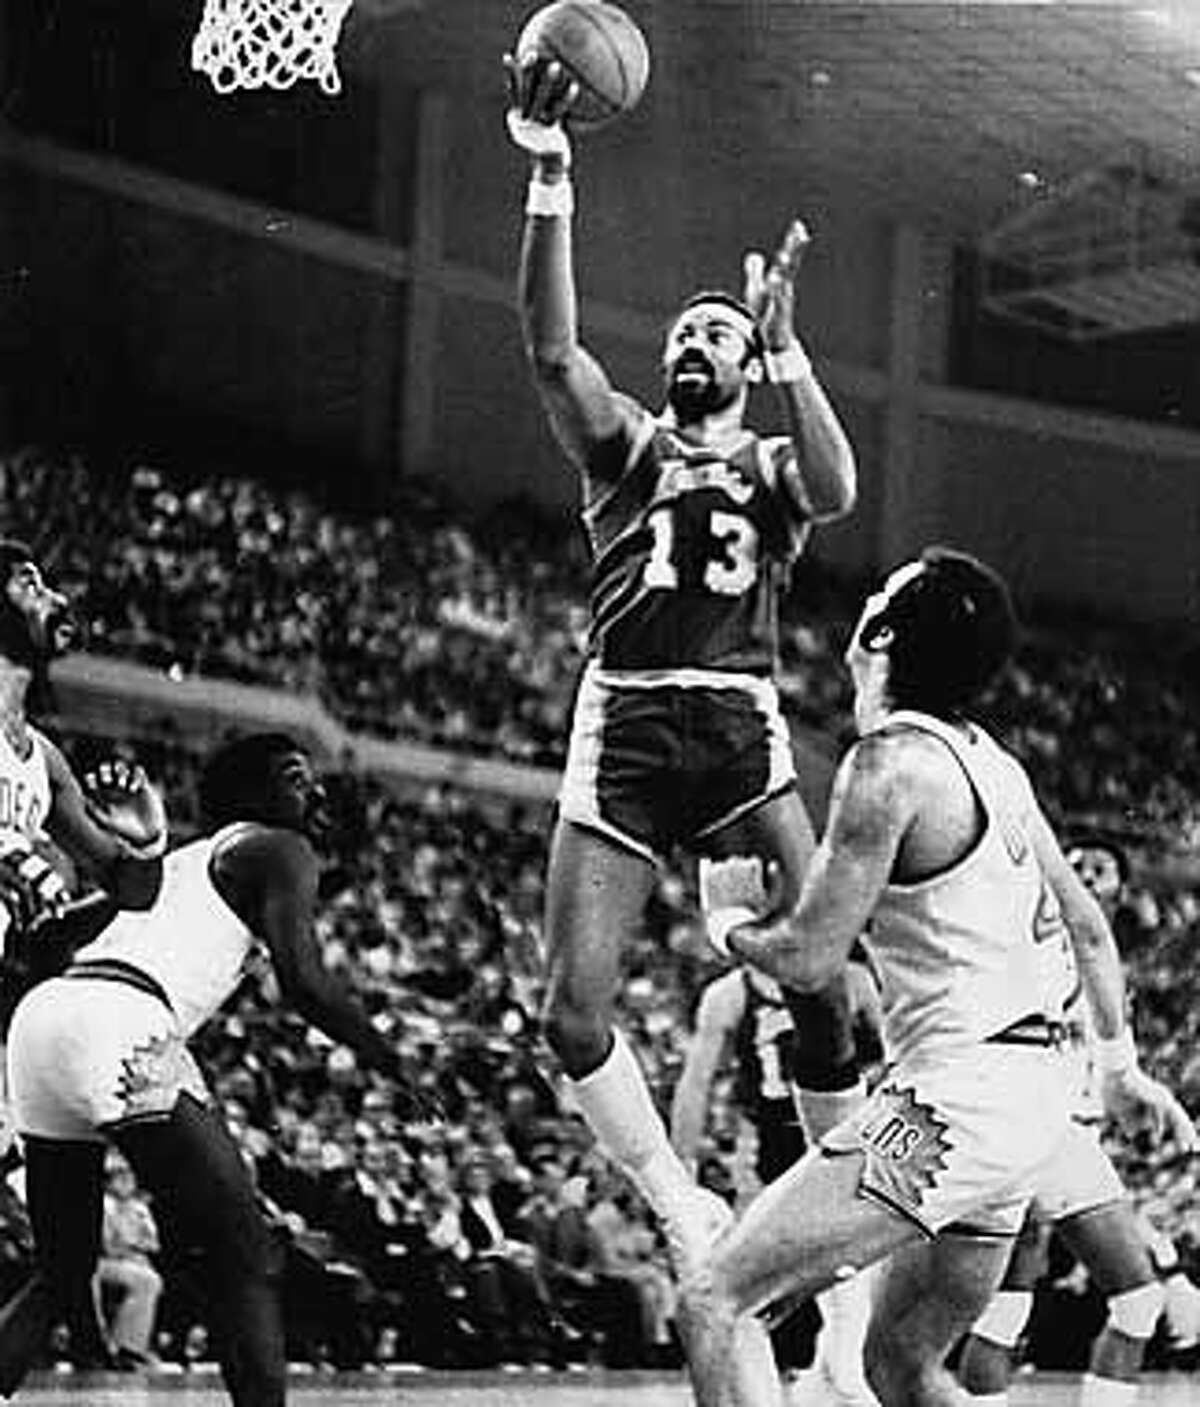 Remembering 'Wilt the Stilt' Chamberlain and his 100-point game in Hershey  in 1962 